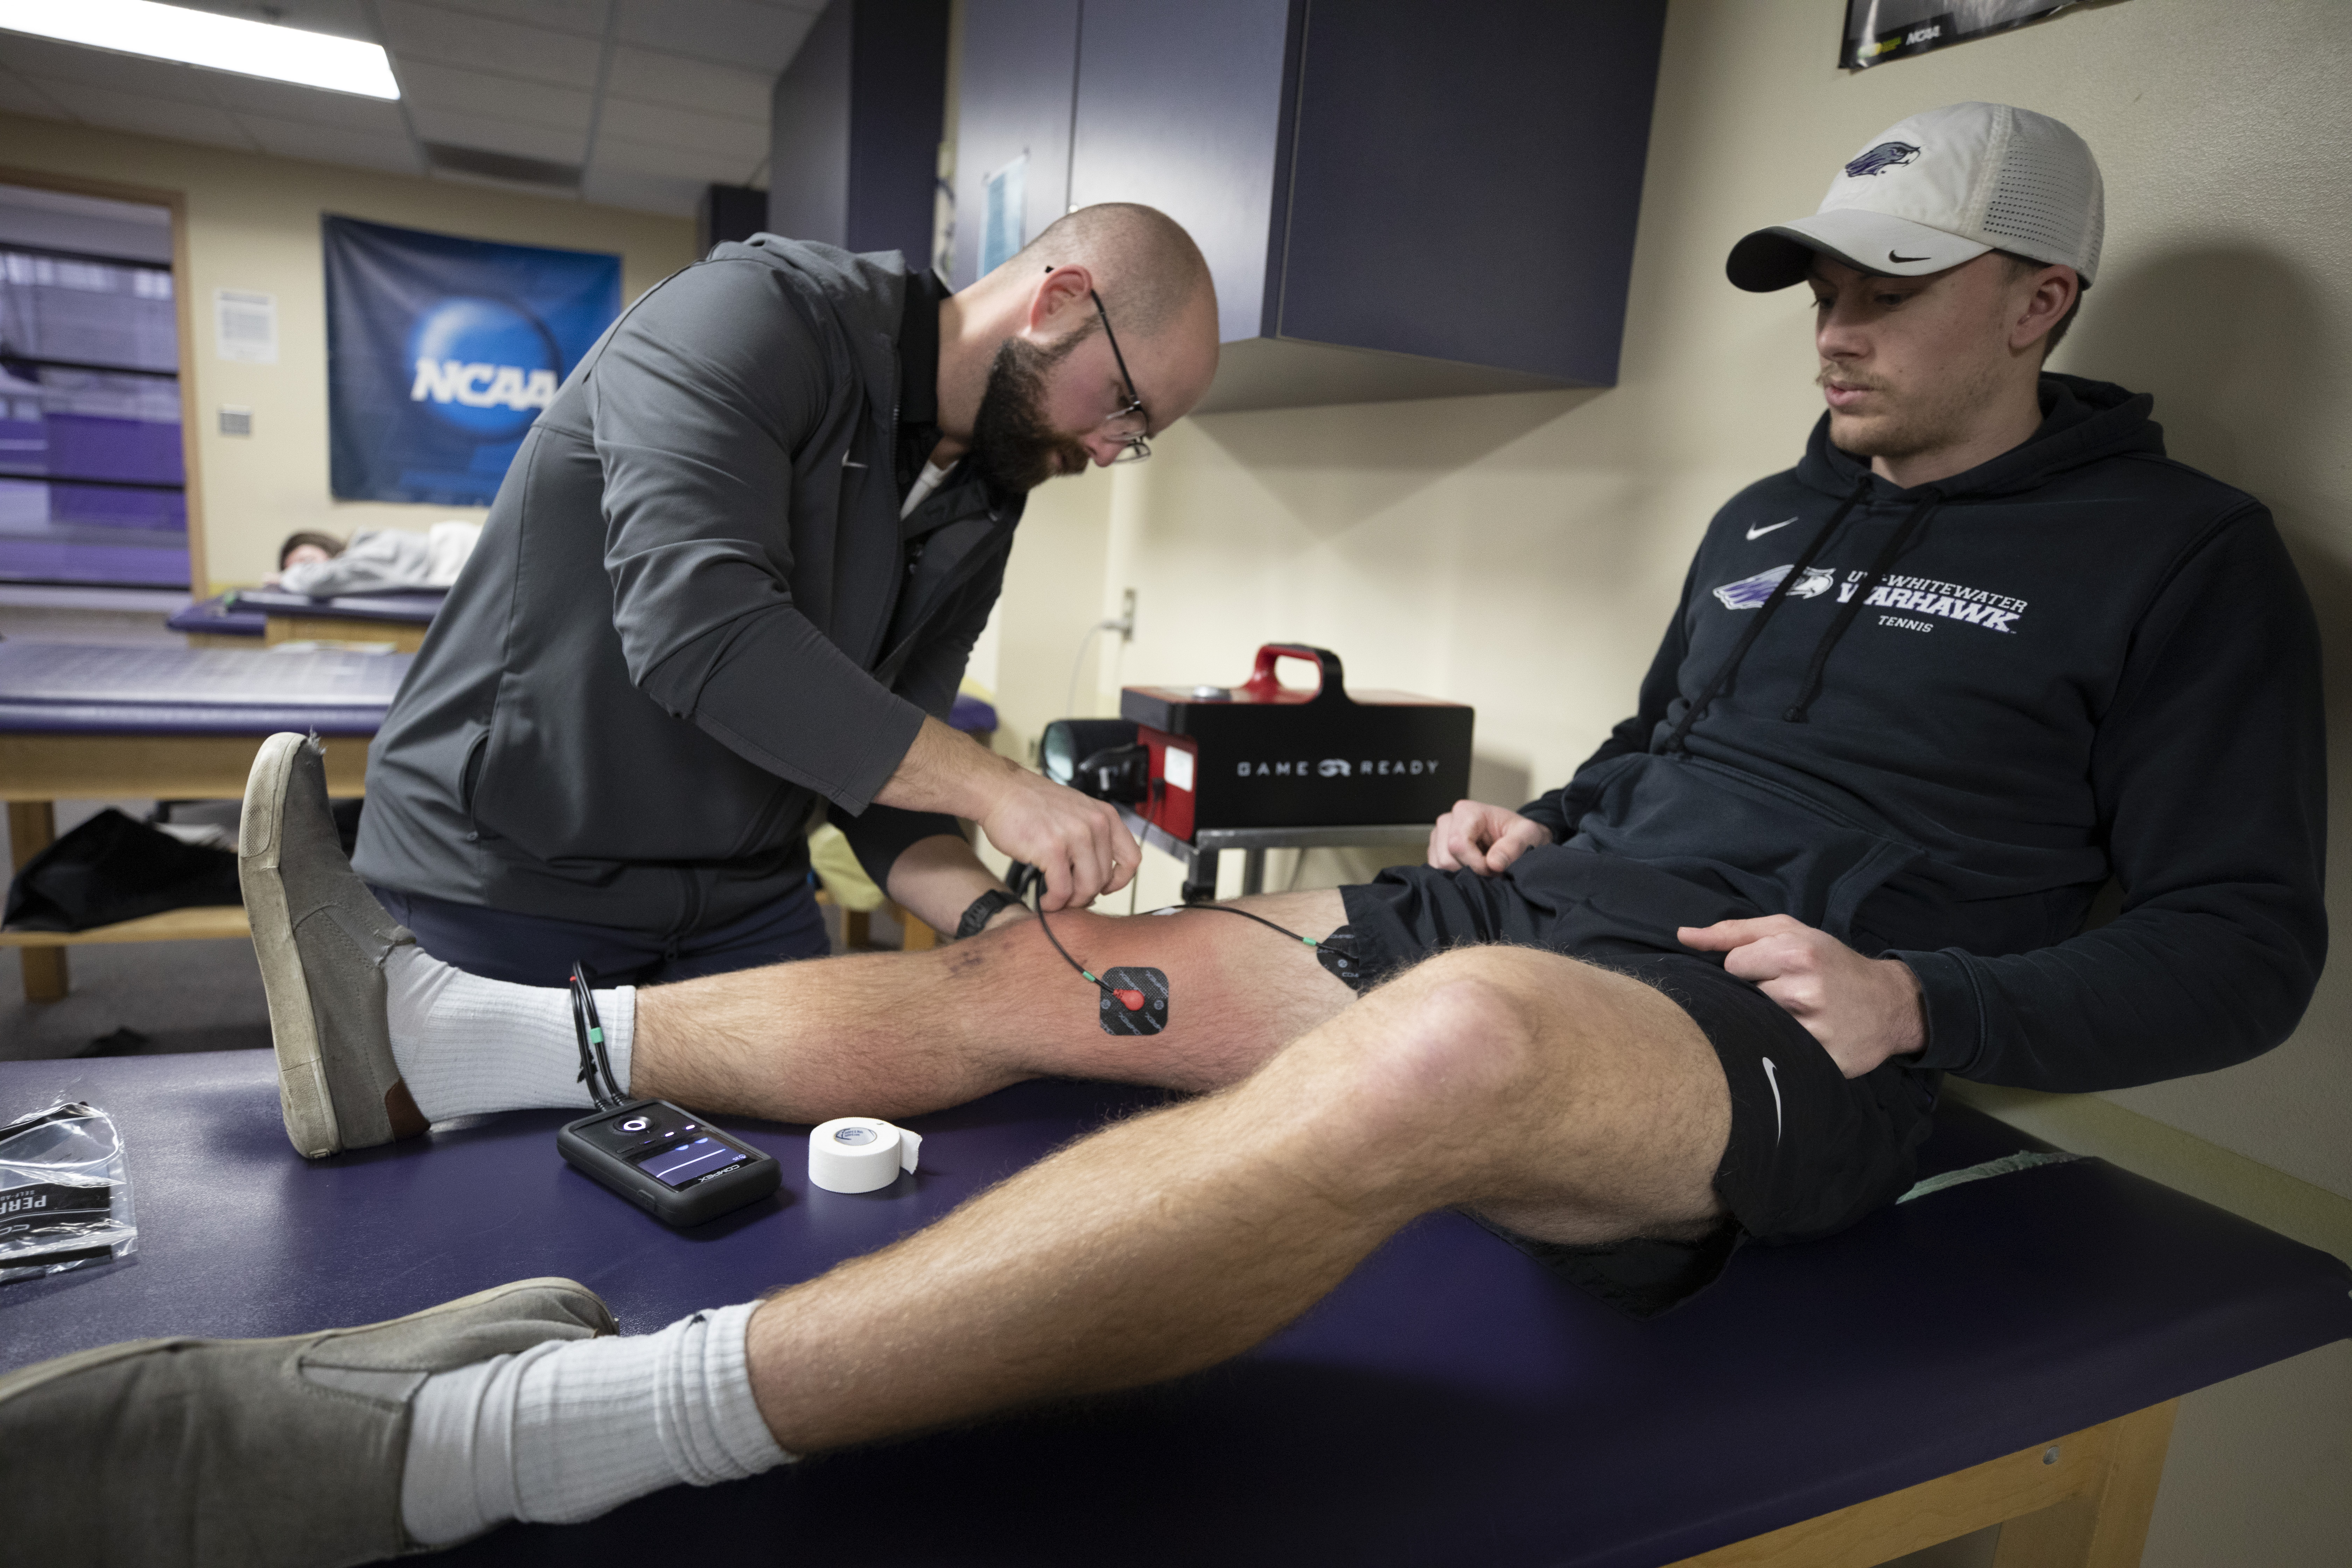 Trainer putting electrodes on leg